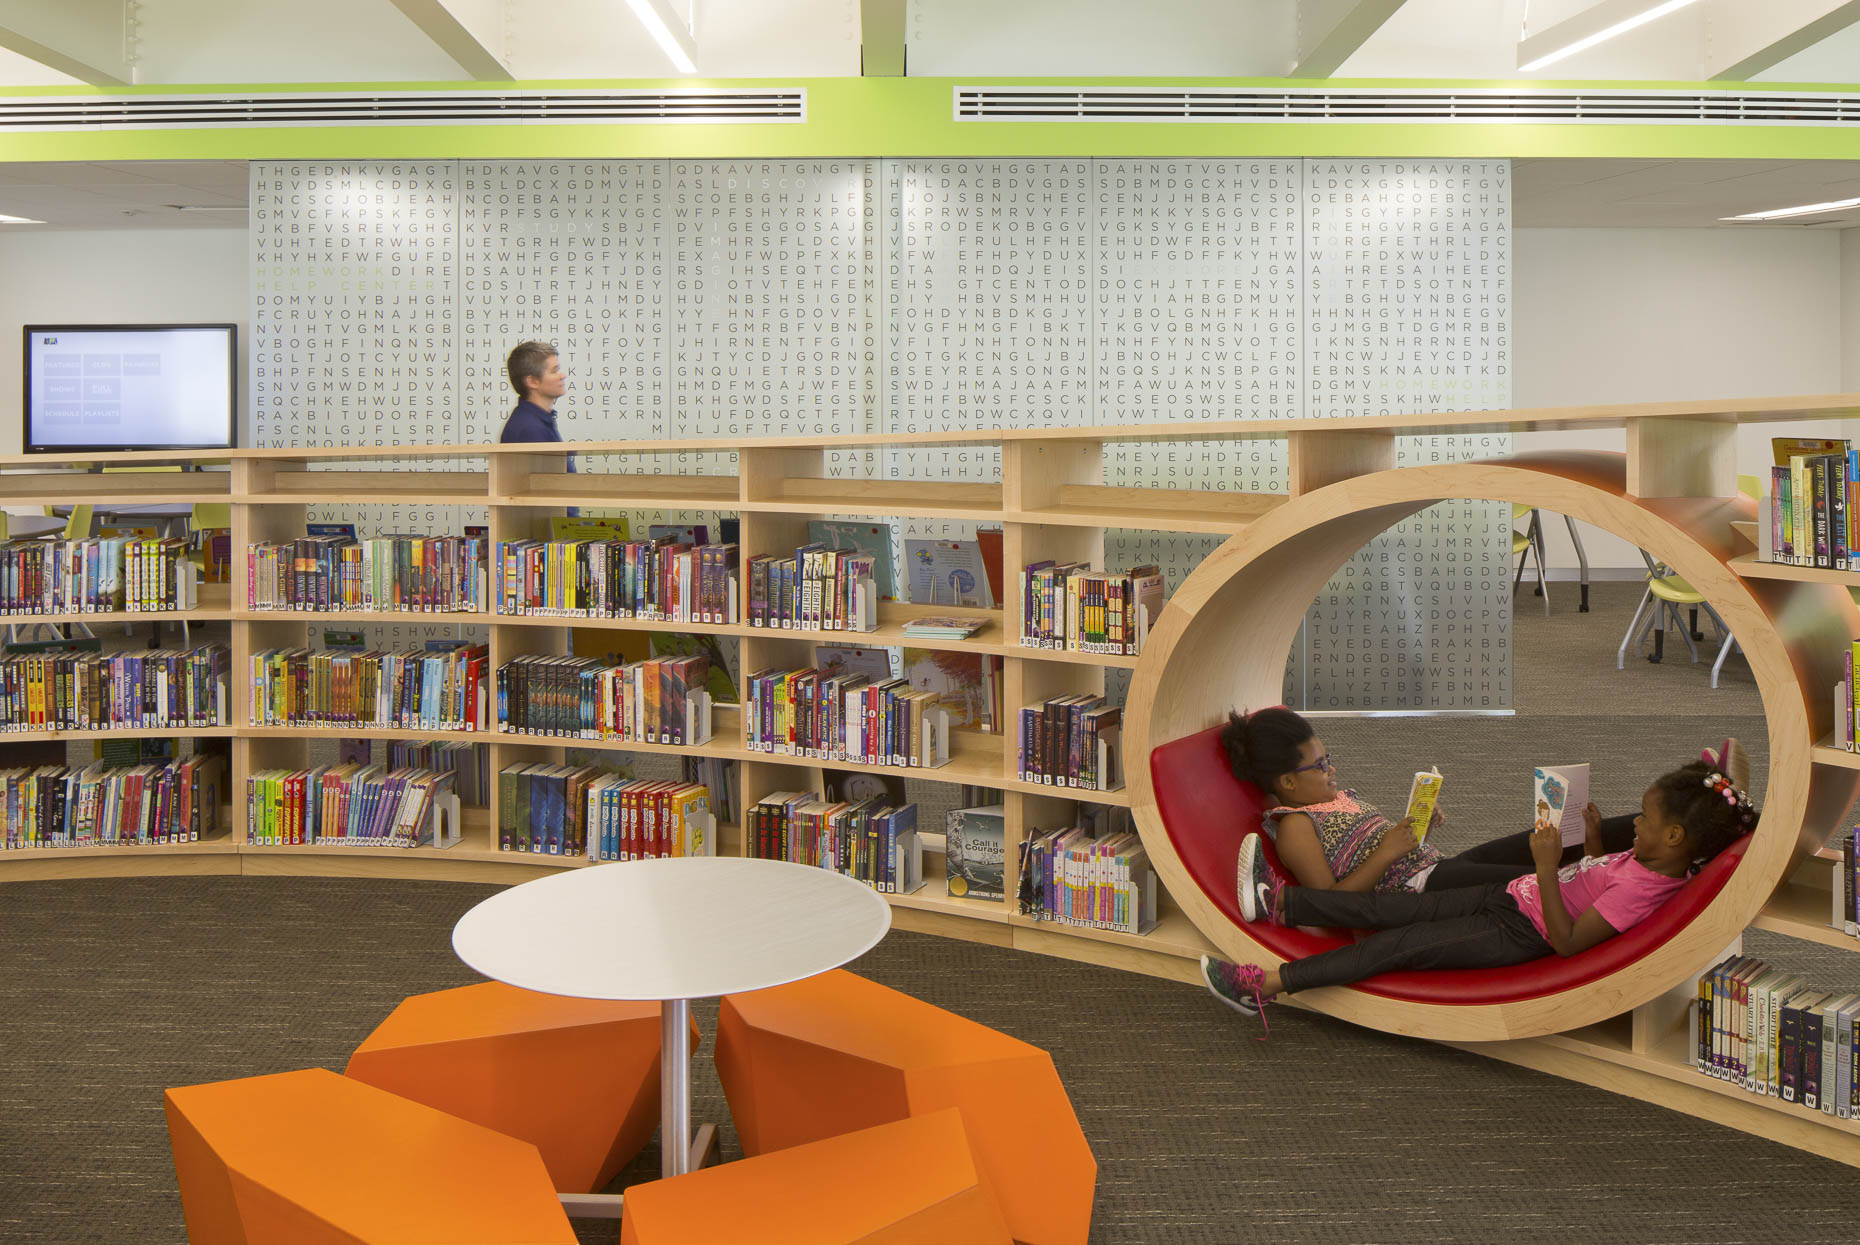 Columbus Metropolitan Library Whitehall Branch by Jonathan Barnes Architecture + Design Photographed by Brad Feinknopf based in Columbus, Ohio